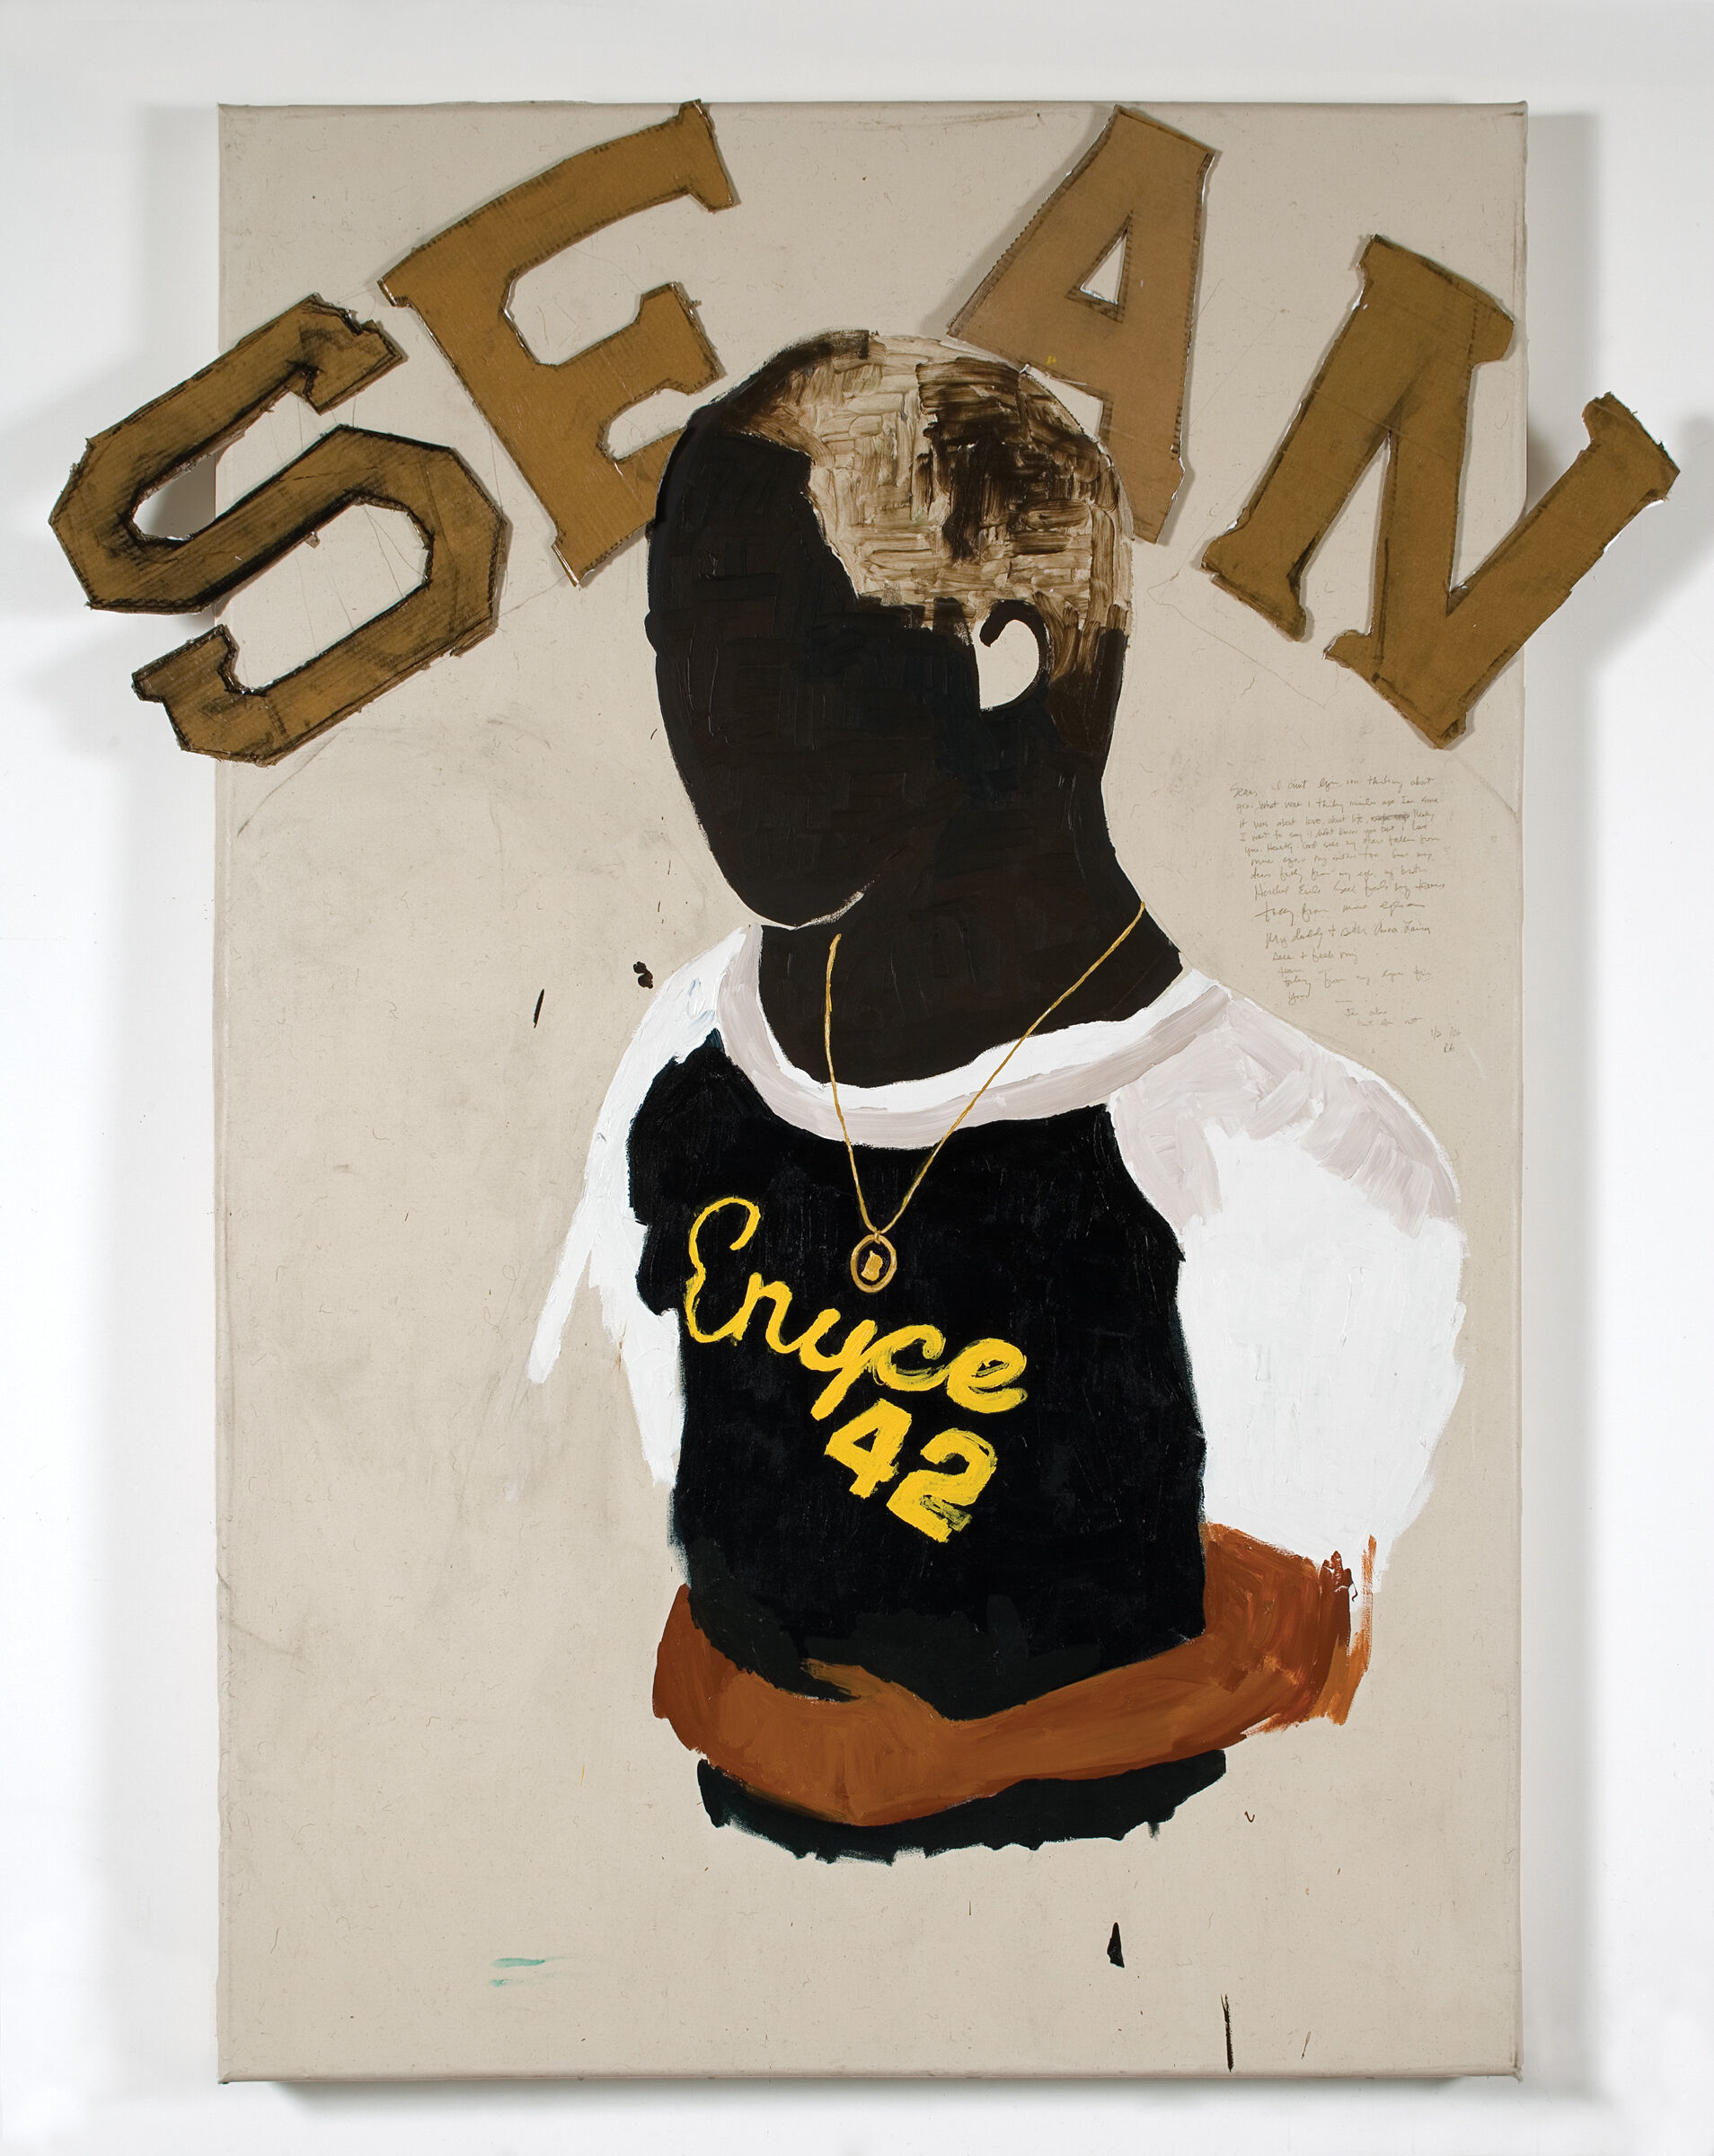 The shape of a person wearing a t-shirt with the words "SEAN" in gold letters above. 